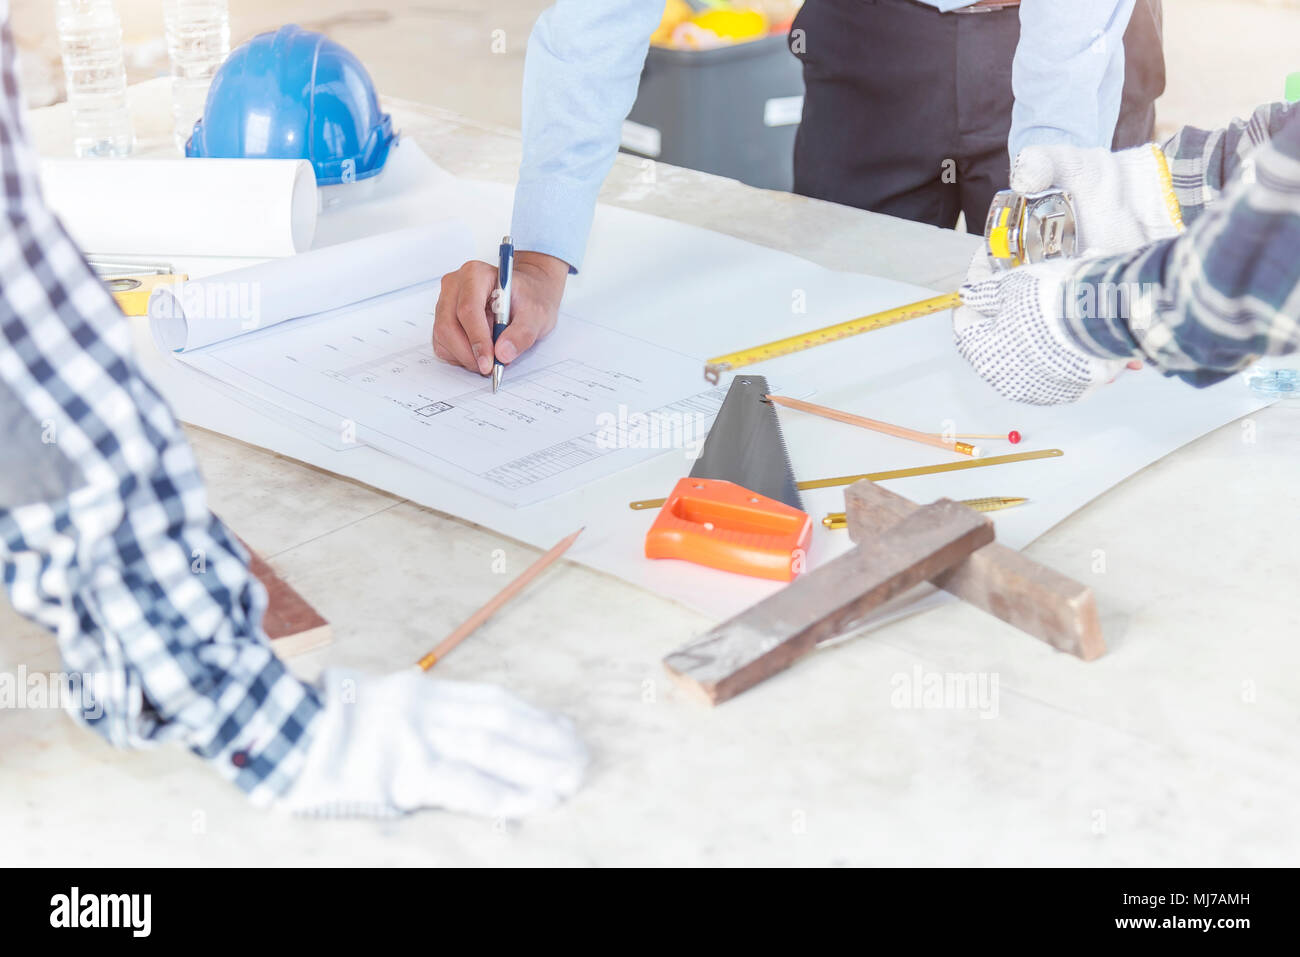 Civil engineer and foreman meeting and working on blueprint. Architects workplace, architectural project blueprints ruler calculator. Stock Photo